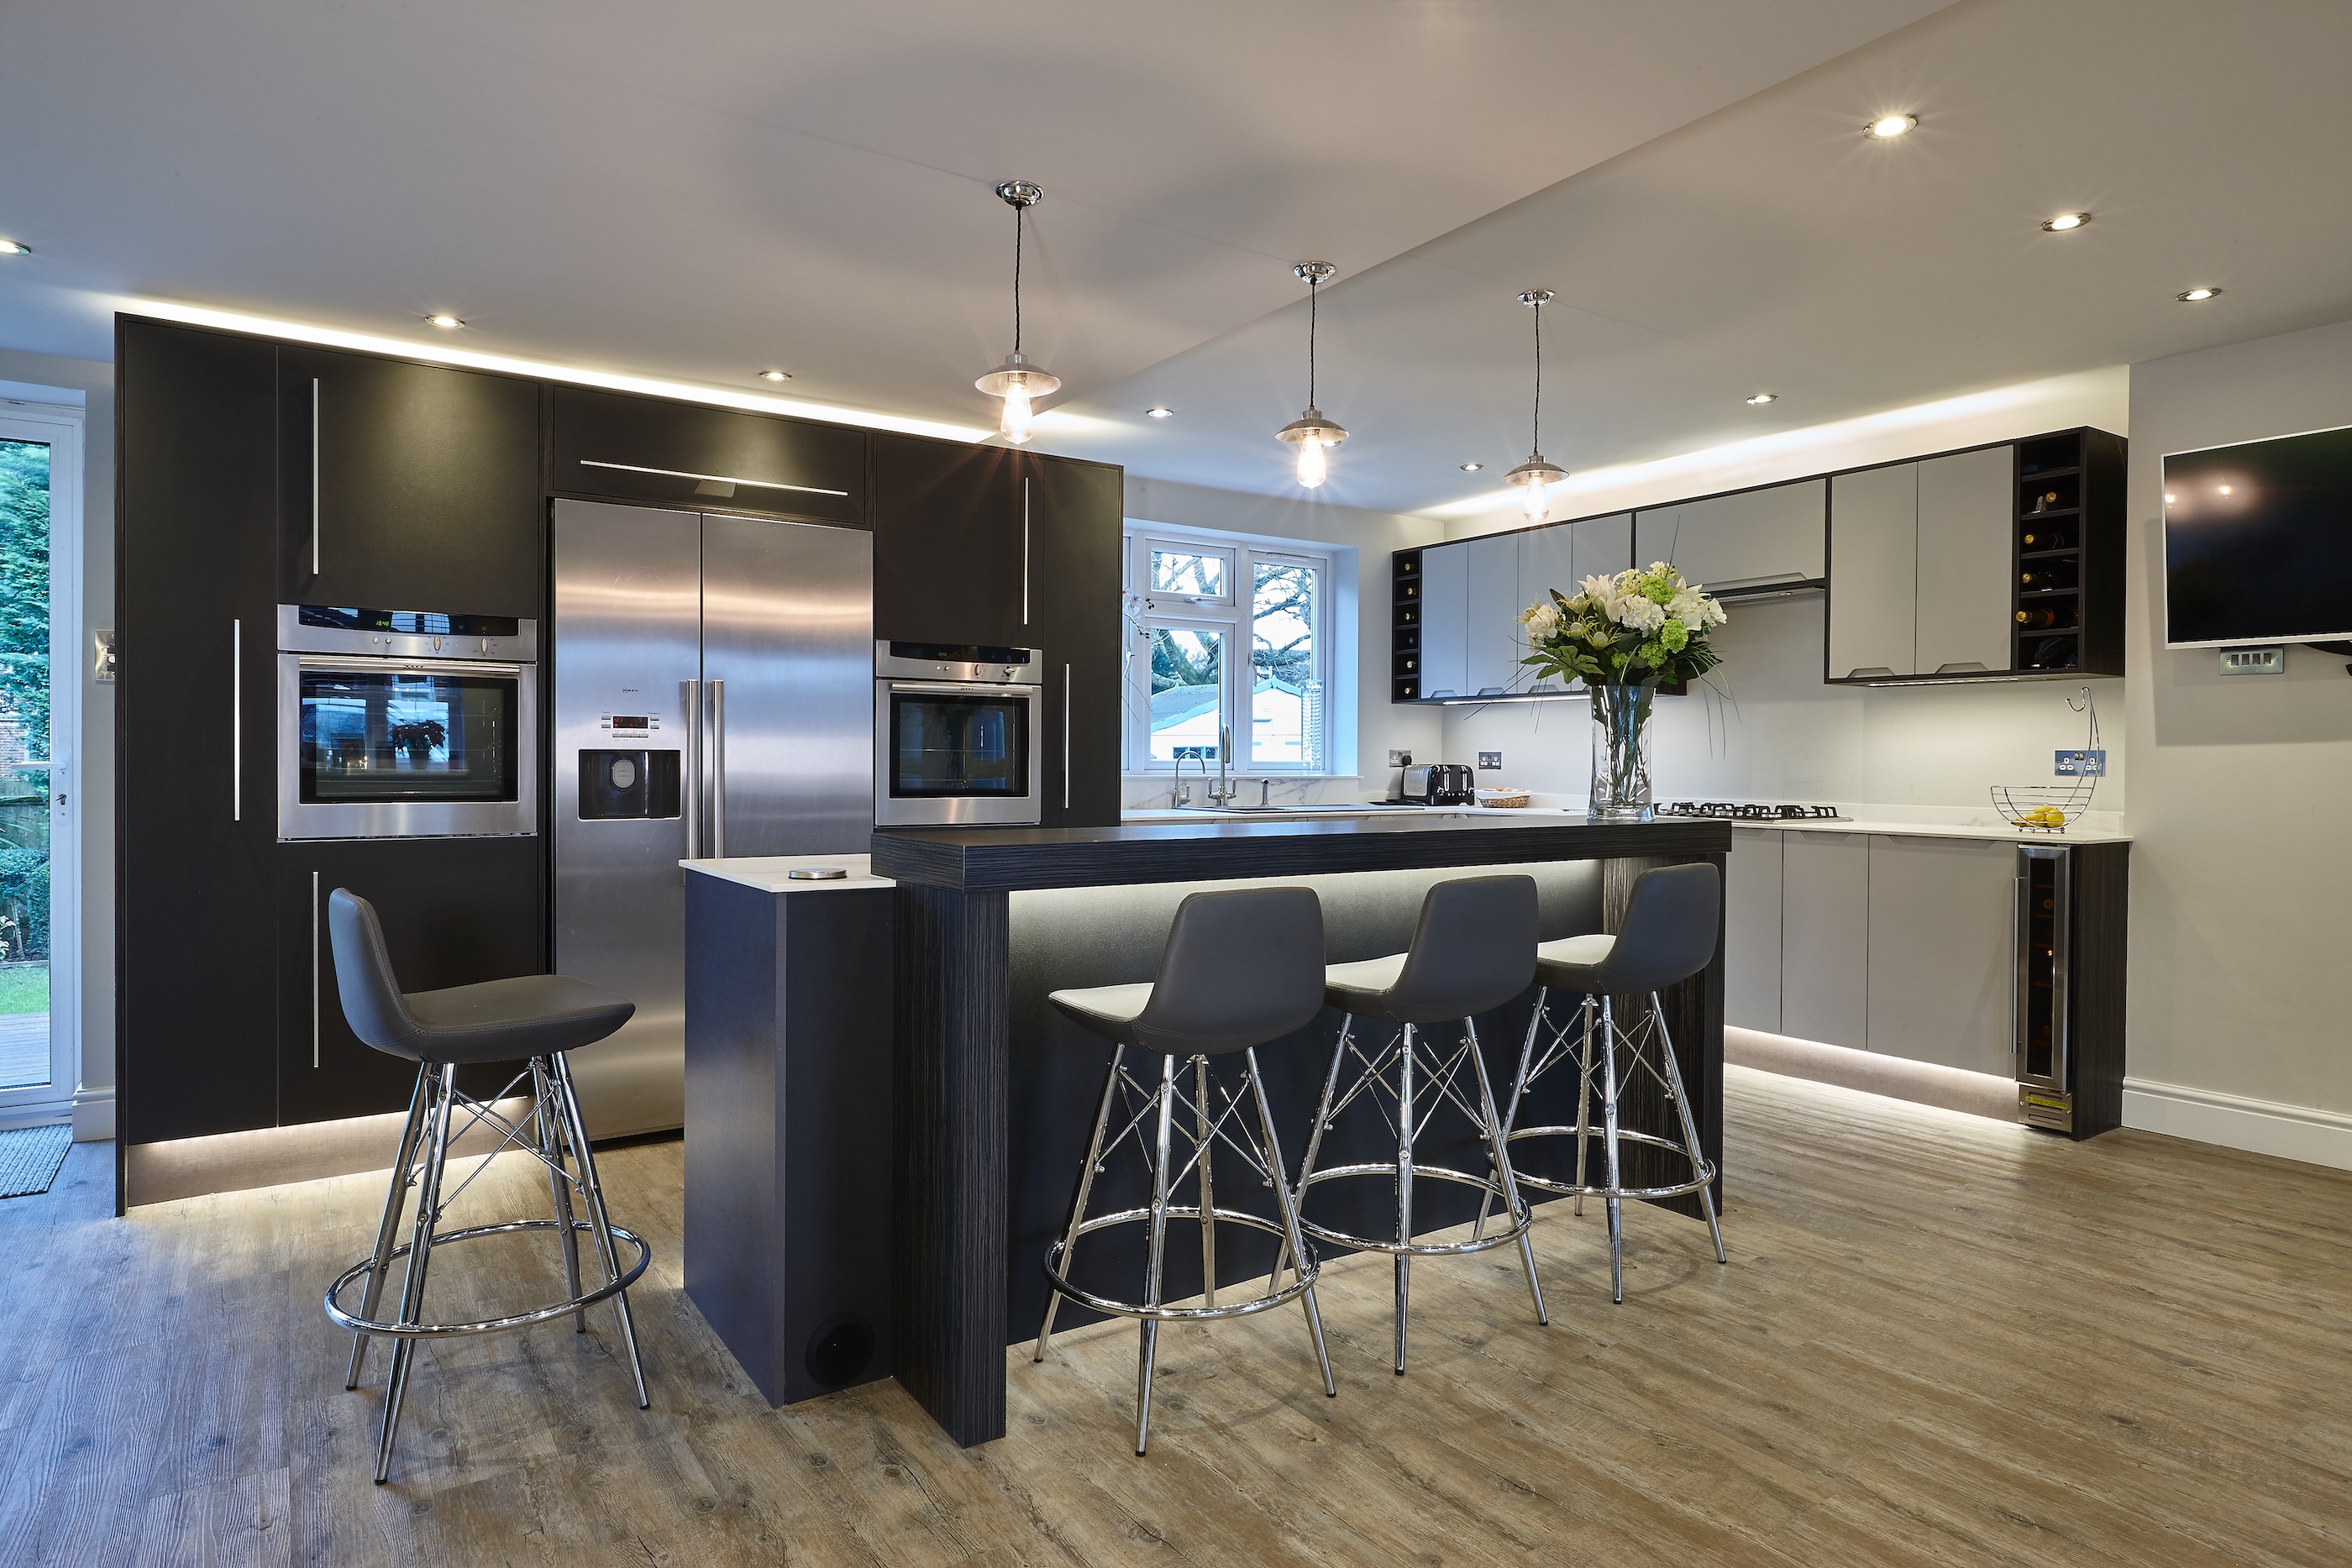 Bespoke contemporary CK kitchen with leather and grey cabinets and a large walnut wood island and stainless steel appliances.